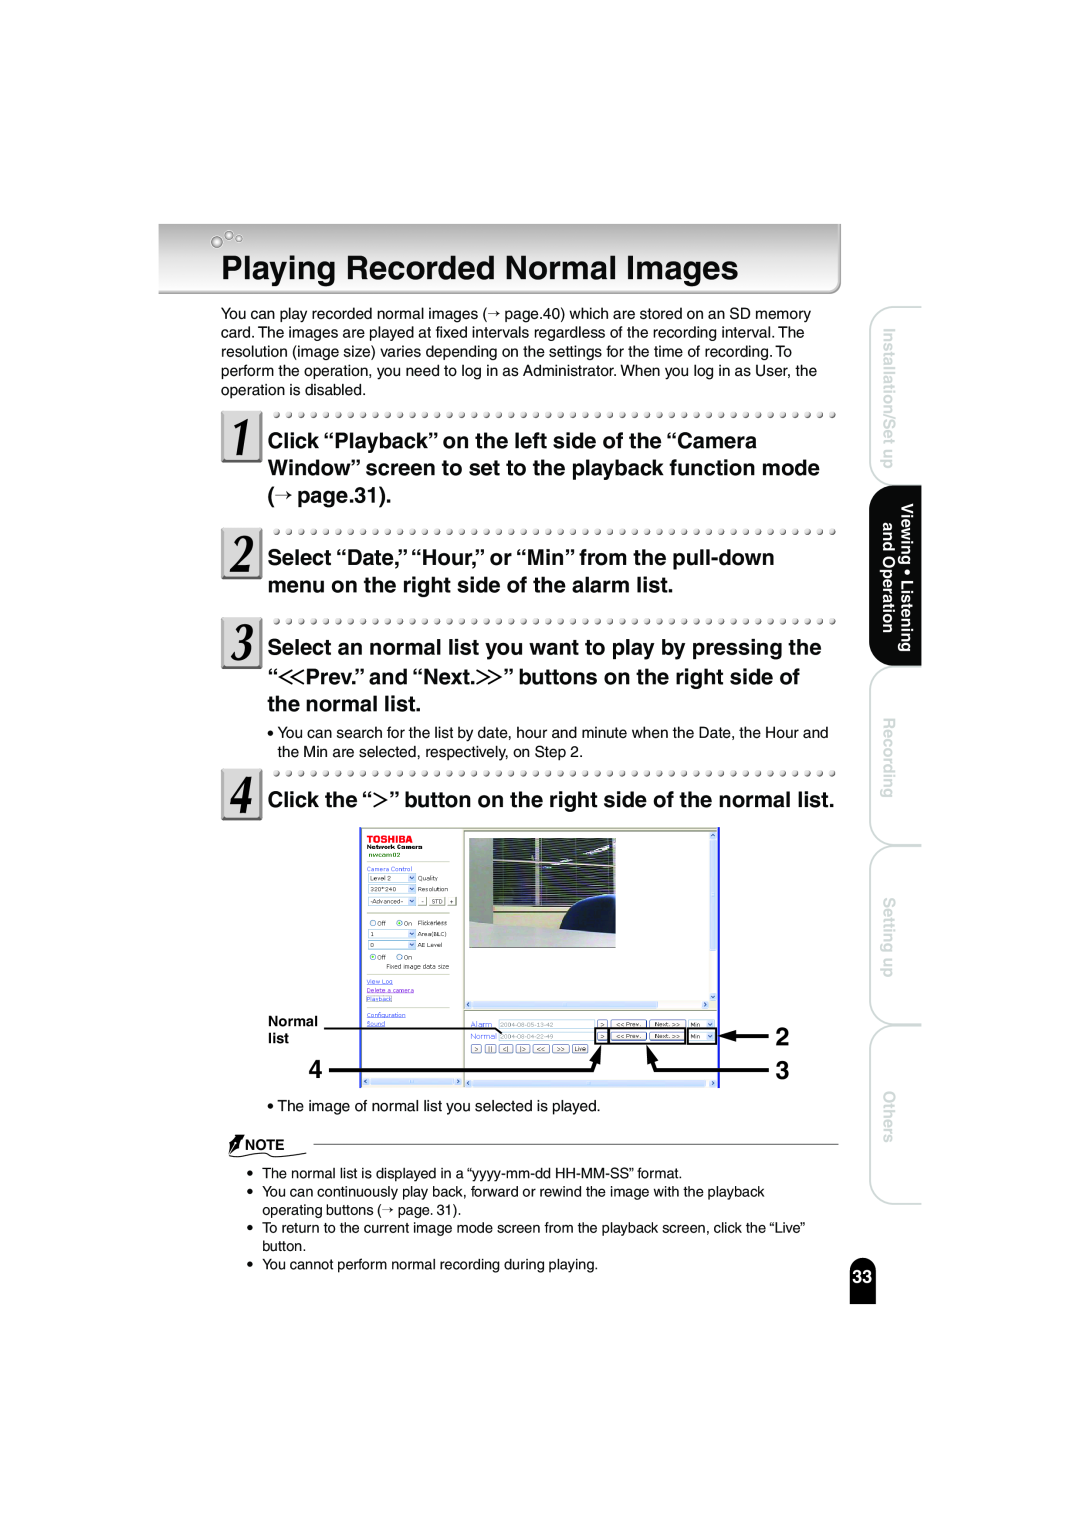 Toshiba IK-WB02A manual Playing Recorded Normal Images, list 